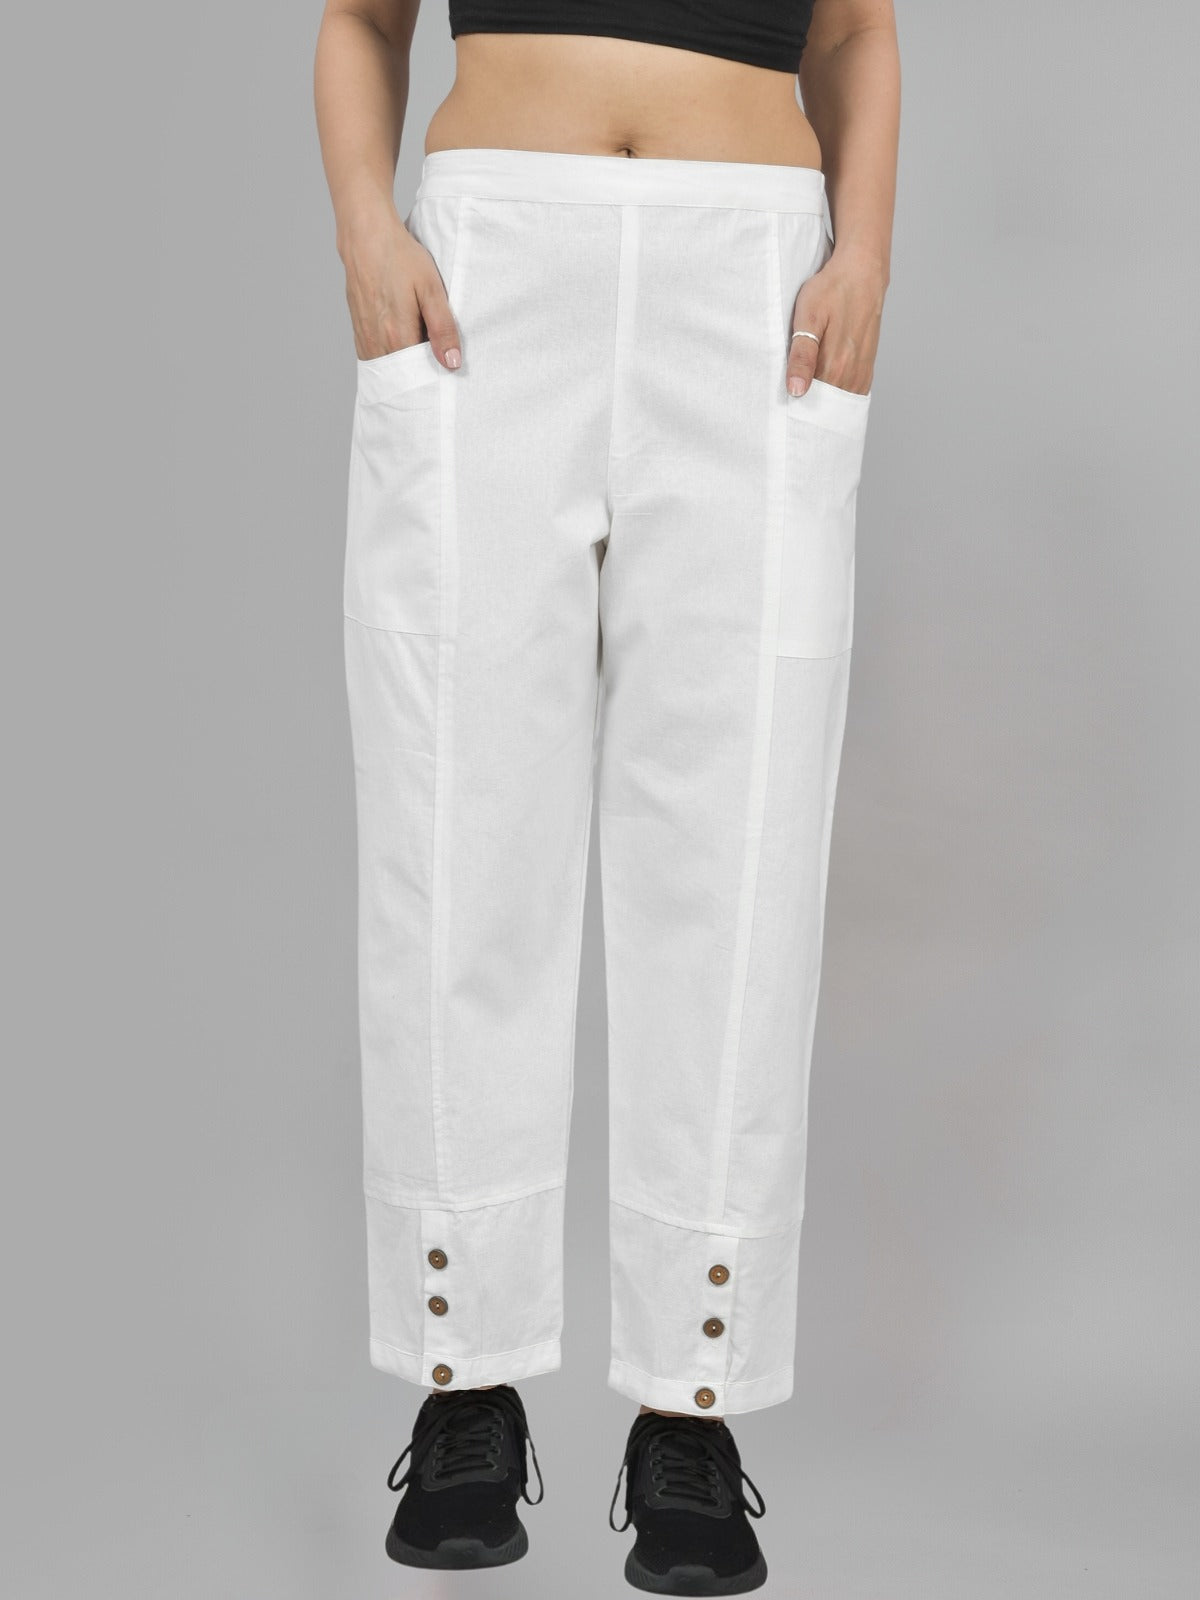 Combo Pack Of Womens White And Wine Side Pocket Straight Cargo Pants